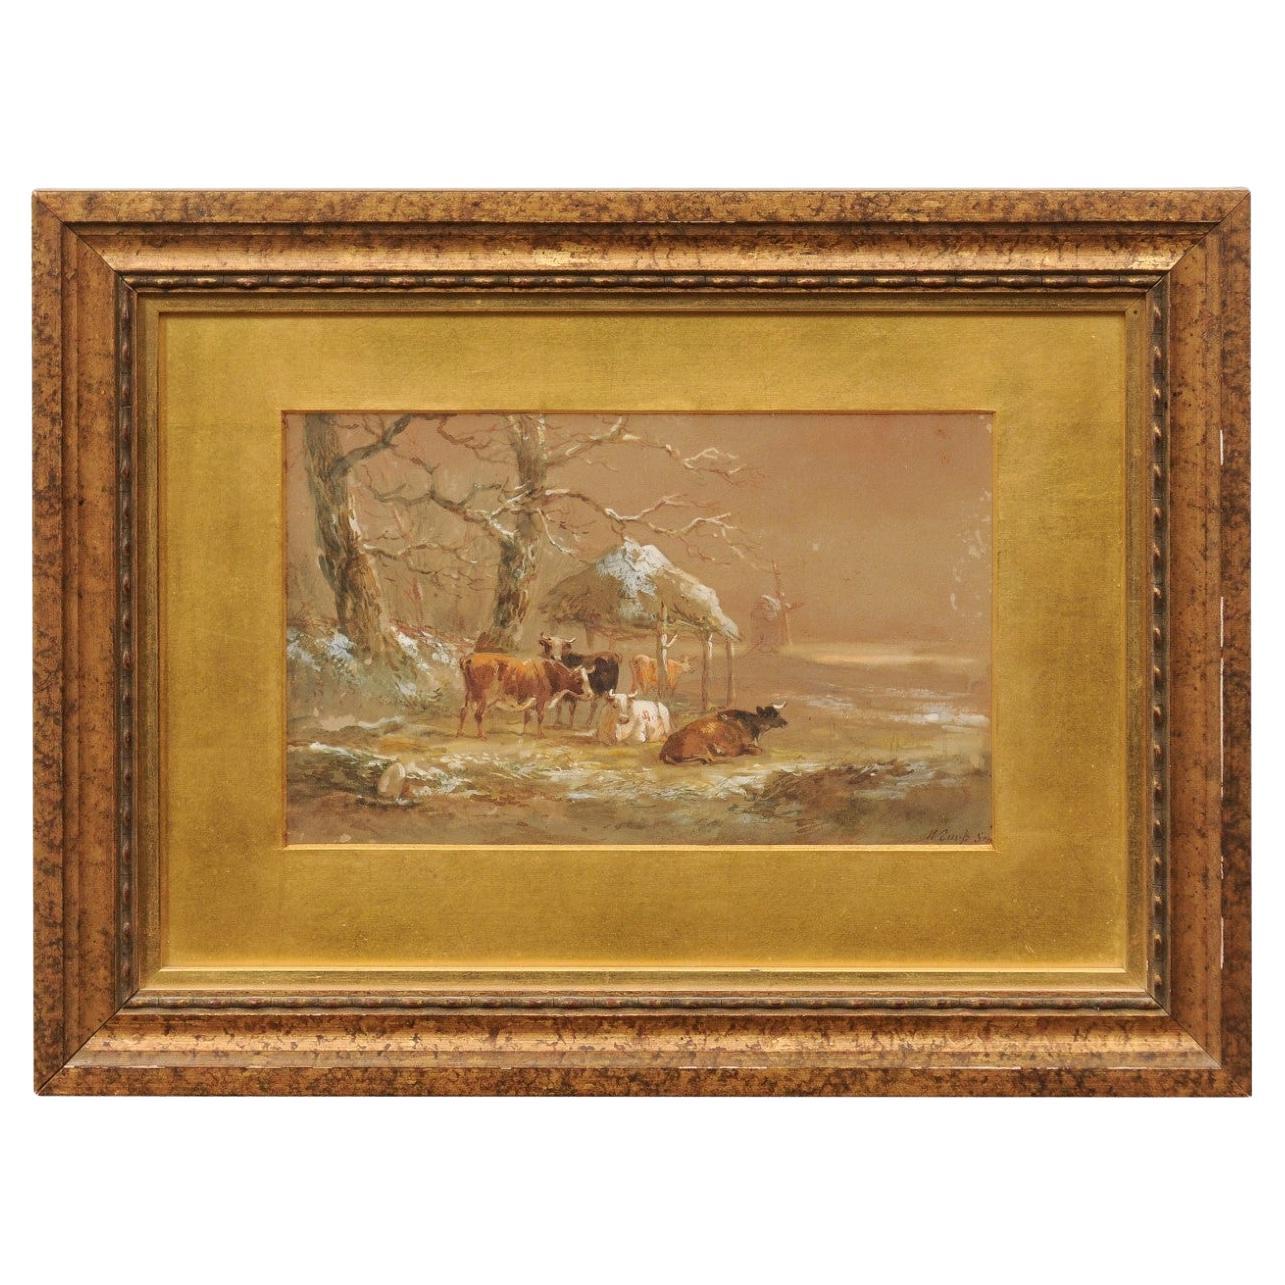 European School Cow In Pasture Pastel on Paper in Gilt Frame, Signed Lower Right